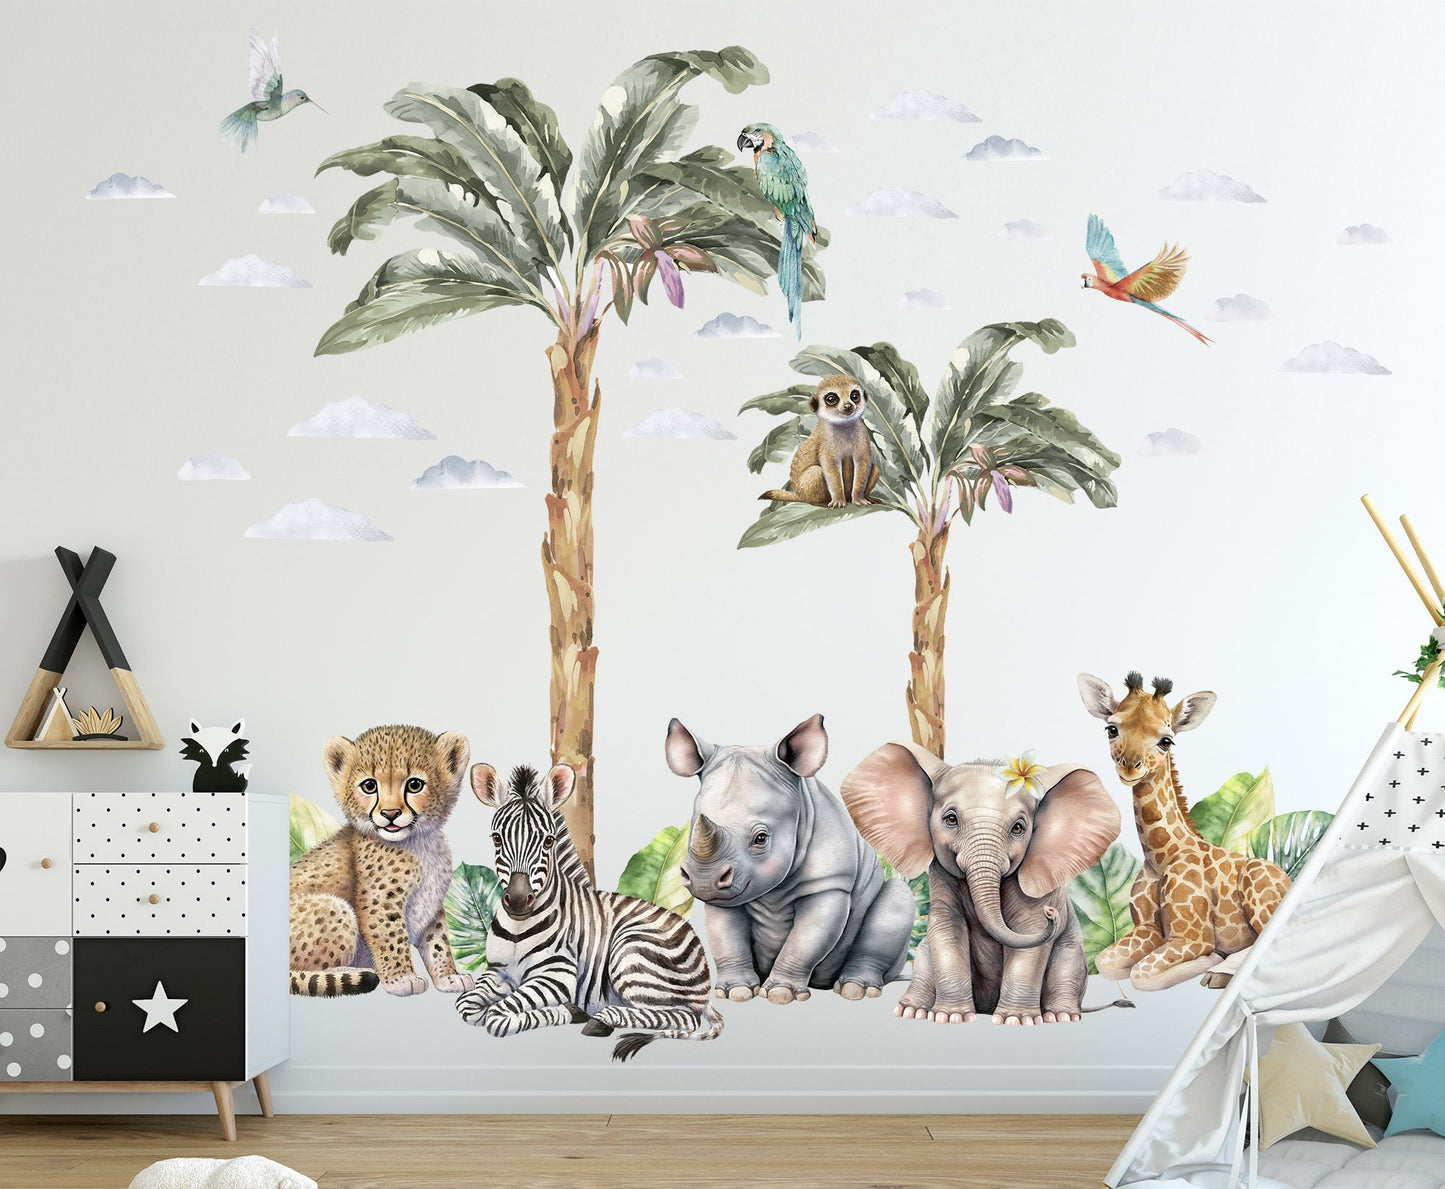 Baby Safari Animals Surrounded by Palm Leaves Wall Decal - Zebra, Giraffe, Elephant, Hippo, Lion - BR356